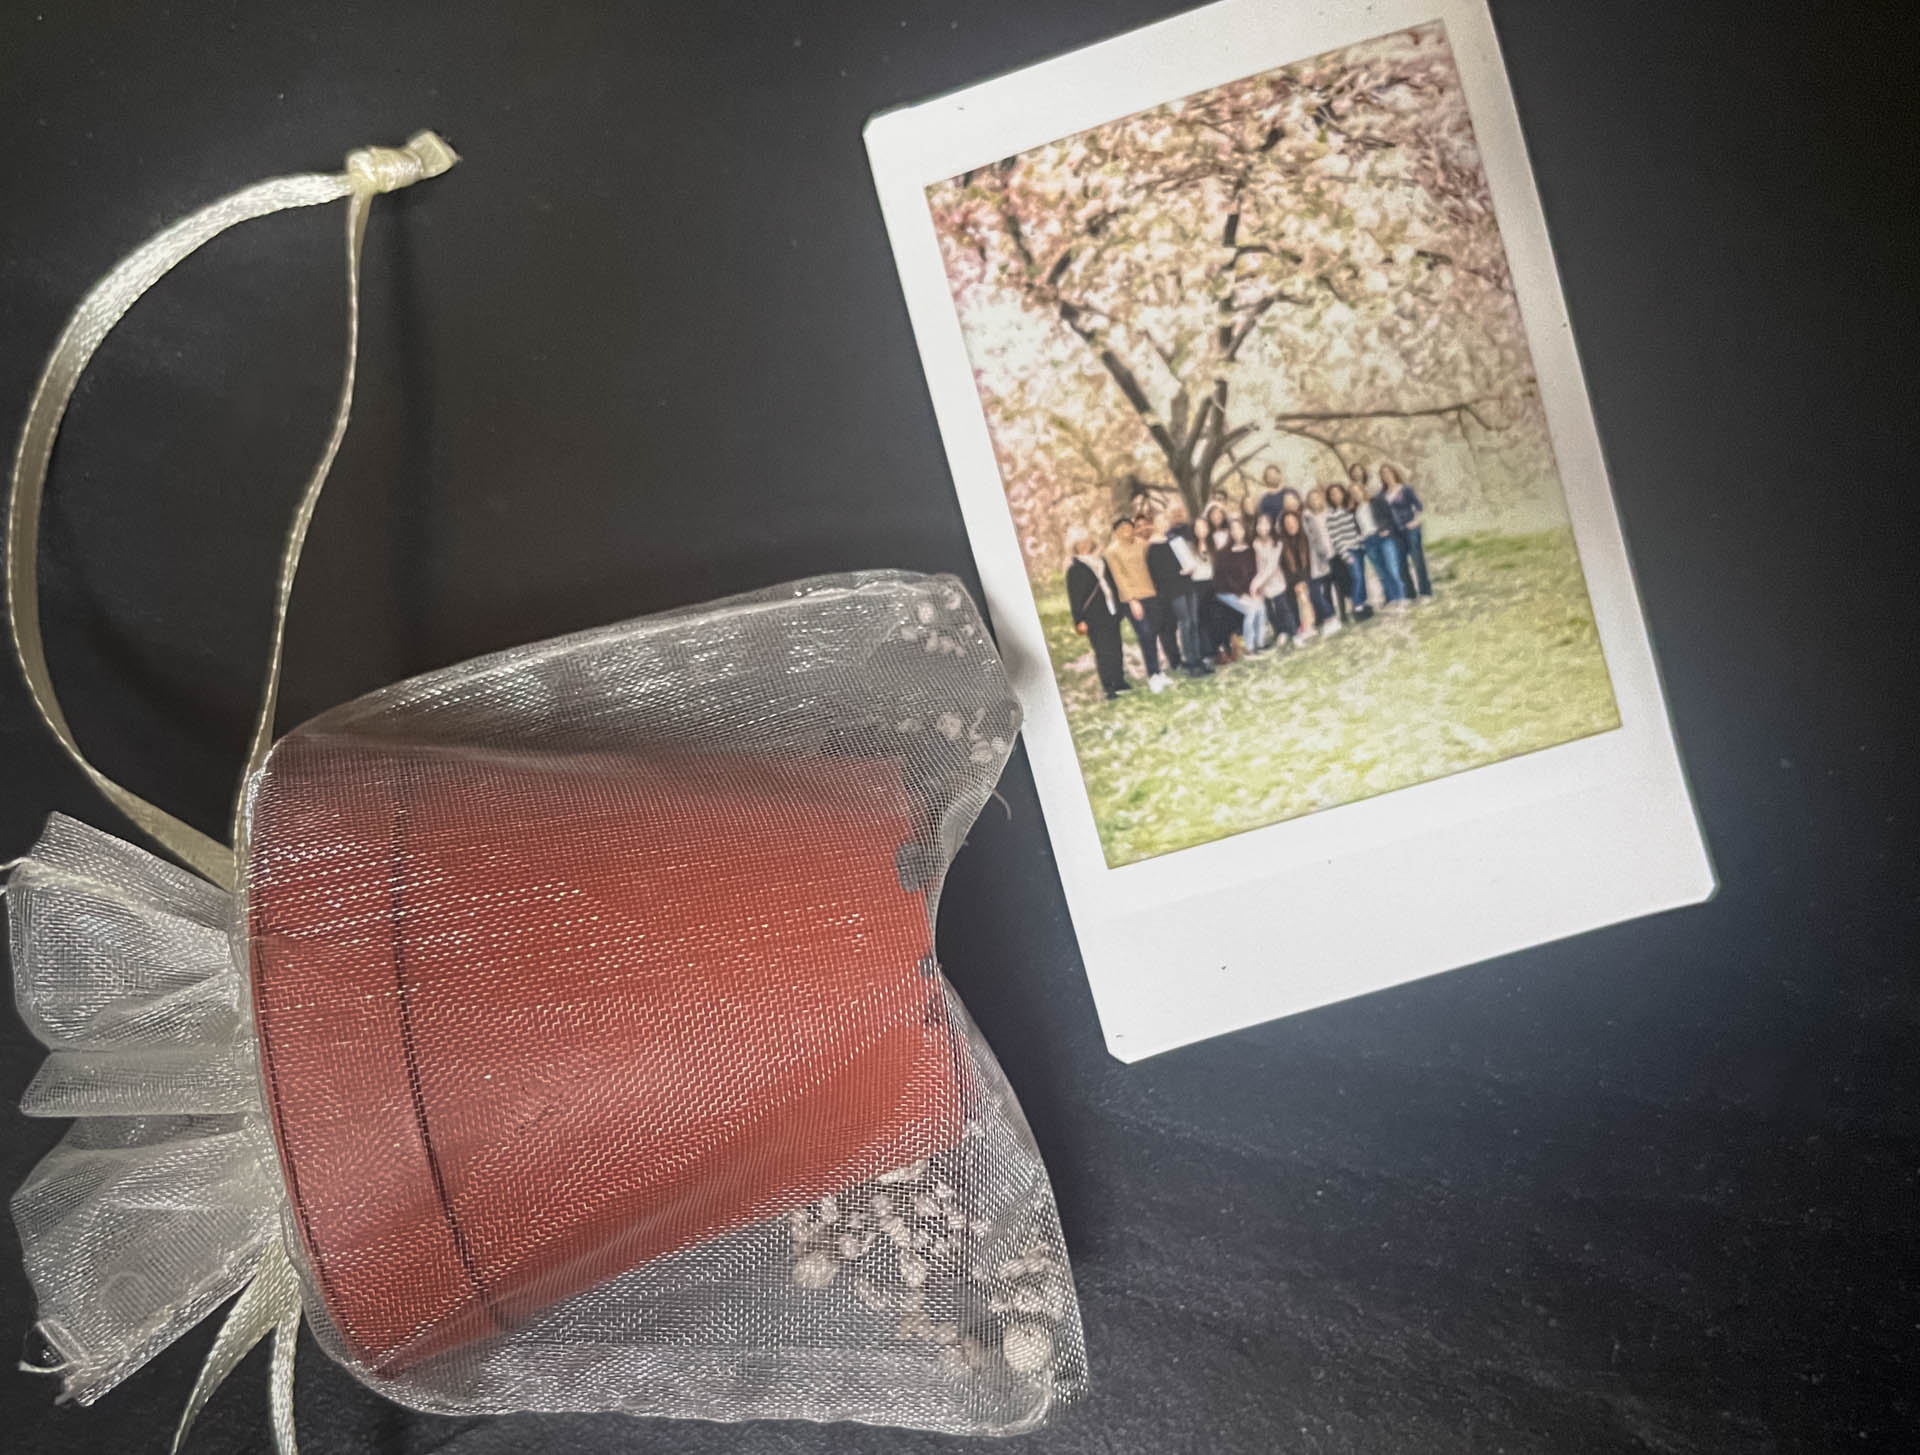 a small pot for plants and a polaroid photo of a group of students